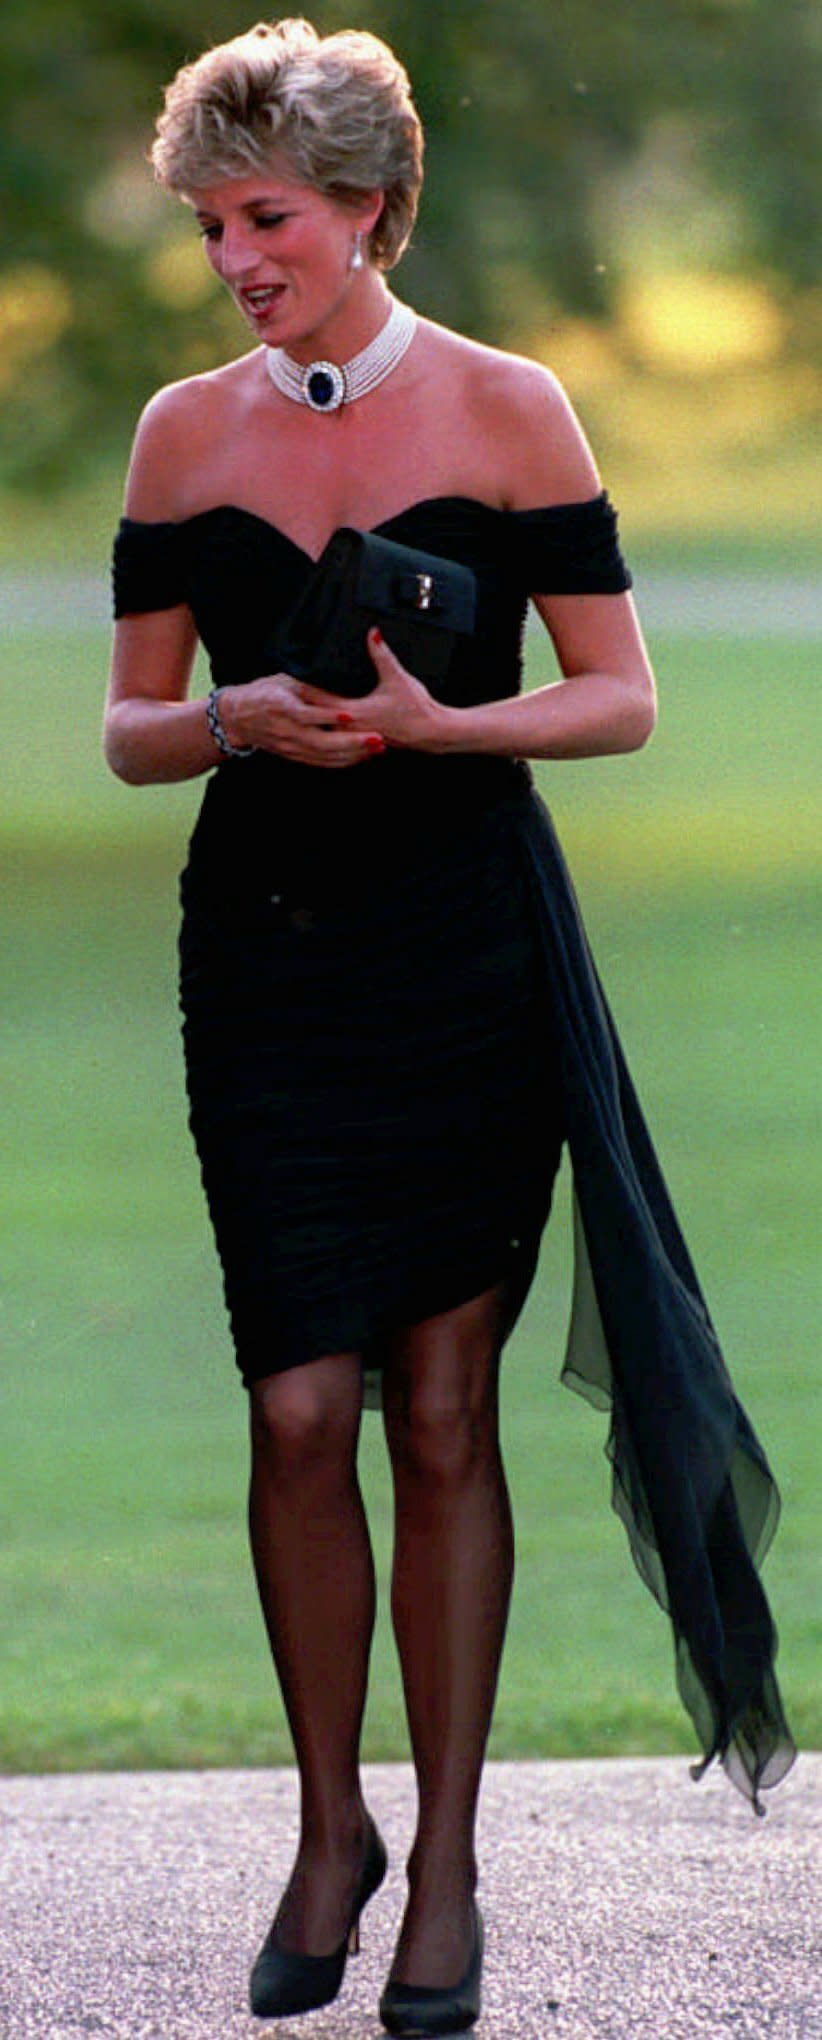 FILE - Diana, Princess of Wales wearing a black pleated chiffon dress, with floating side panel, by Christina Stamboulian, during a party given at the Serpentine Gallery in London in 1996. Above all, there was shock. That’s the word people use over and over again when they remember Princess Diana’s death in a Paris car crash 25 years ago this week. The woman the world watched grow from a shy teenage nursery school teacher into a glamorous celebrity who comforted AIDS patients and campaigned for landmine removal couldn’t be dead at the age of 36, could she? (AP Photo, PA, File)